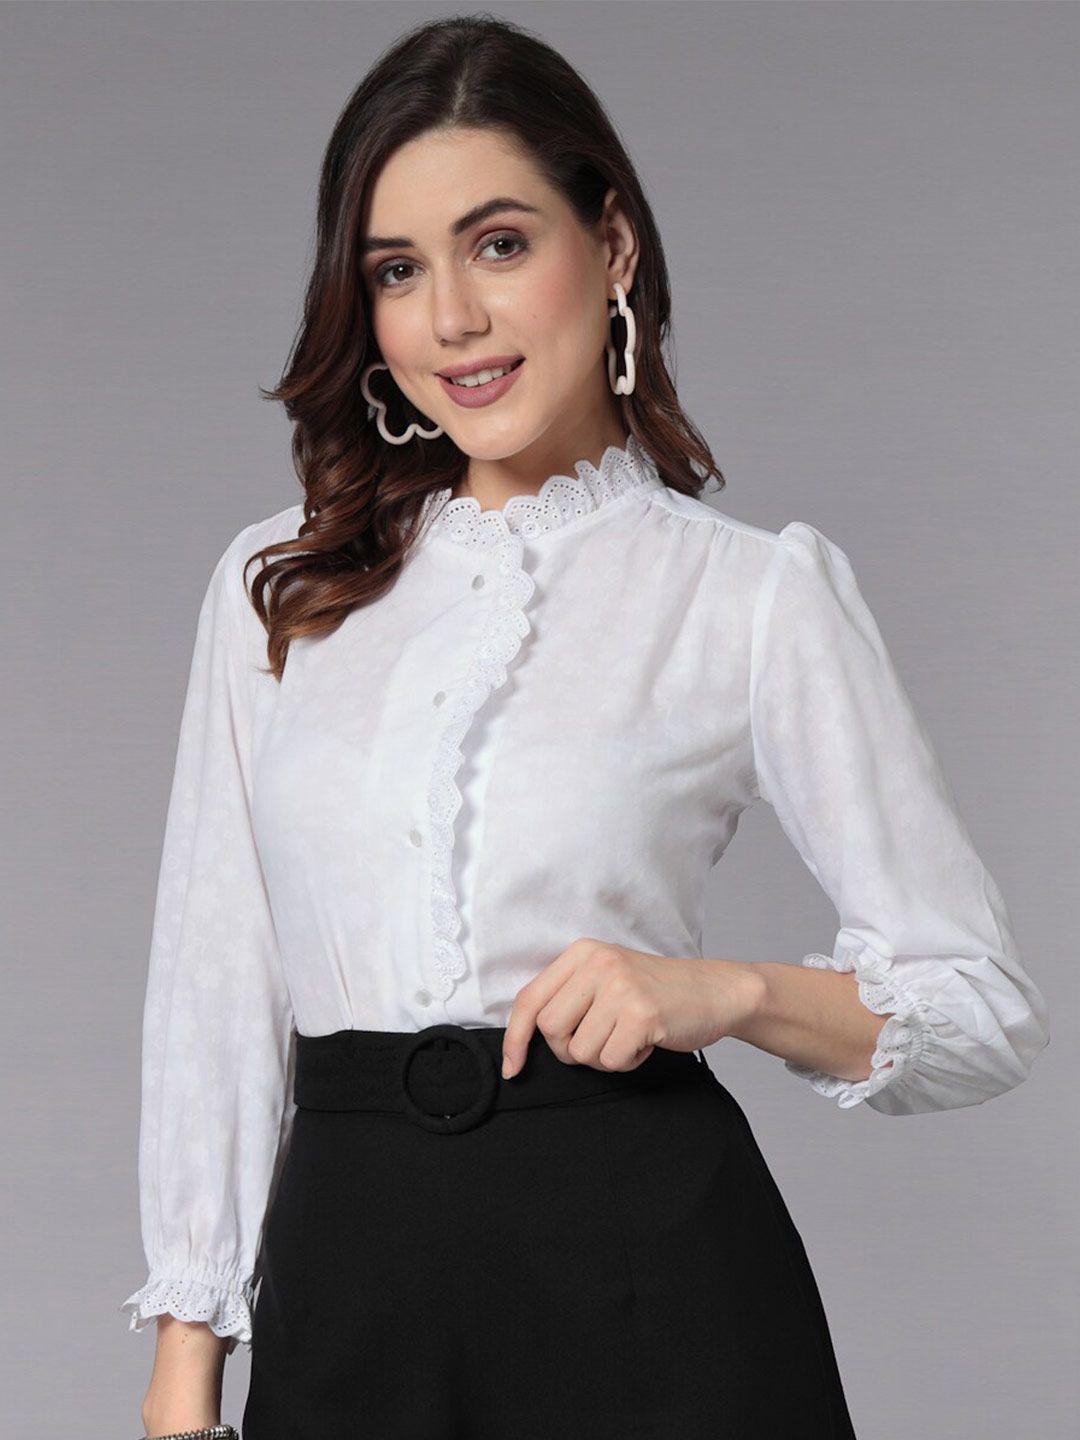 style quotient floral printed high neck cuffed sleeves shirt style top